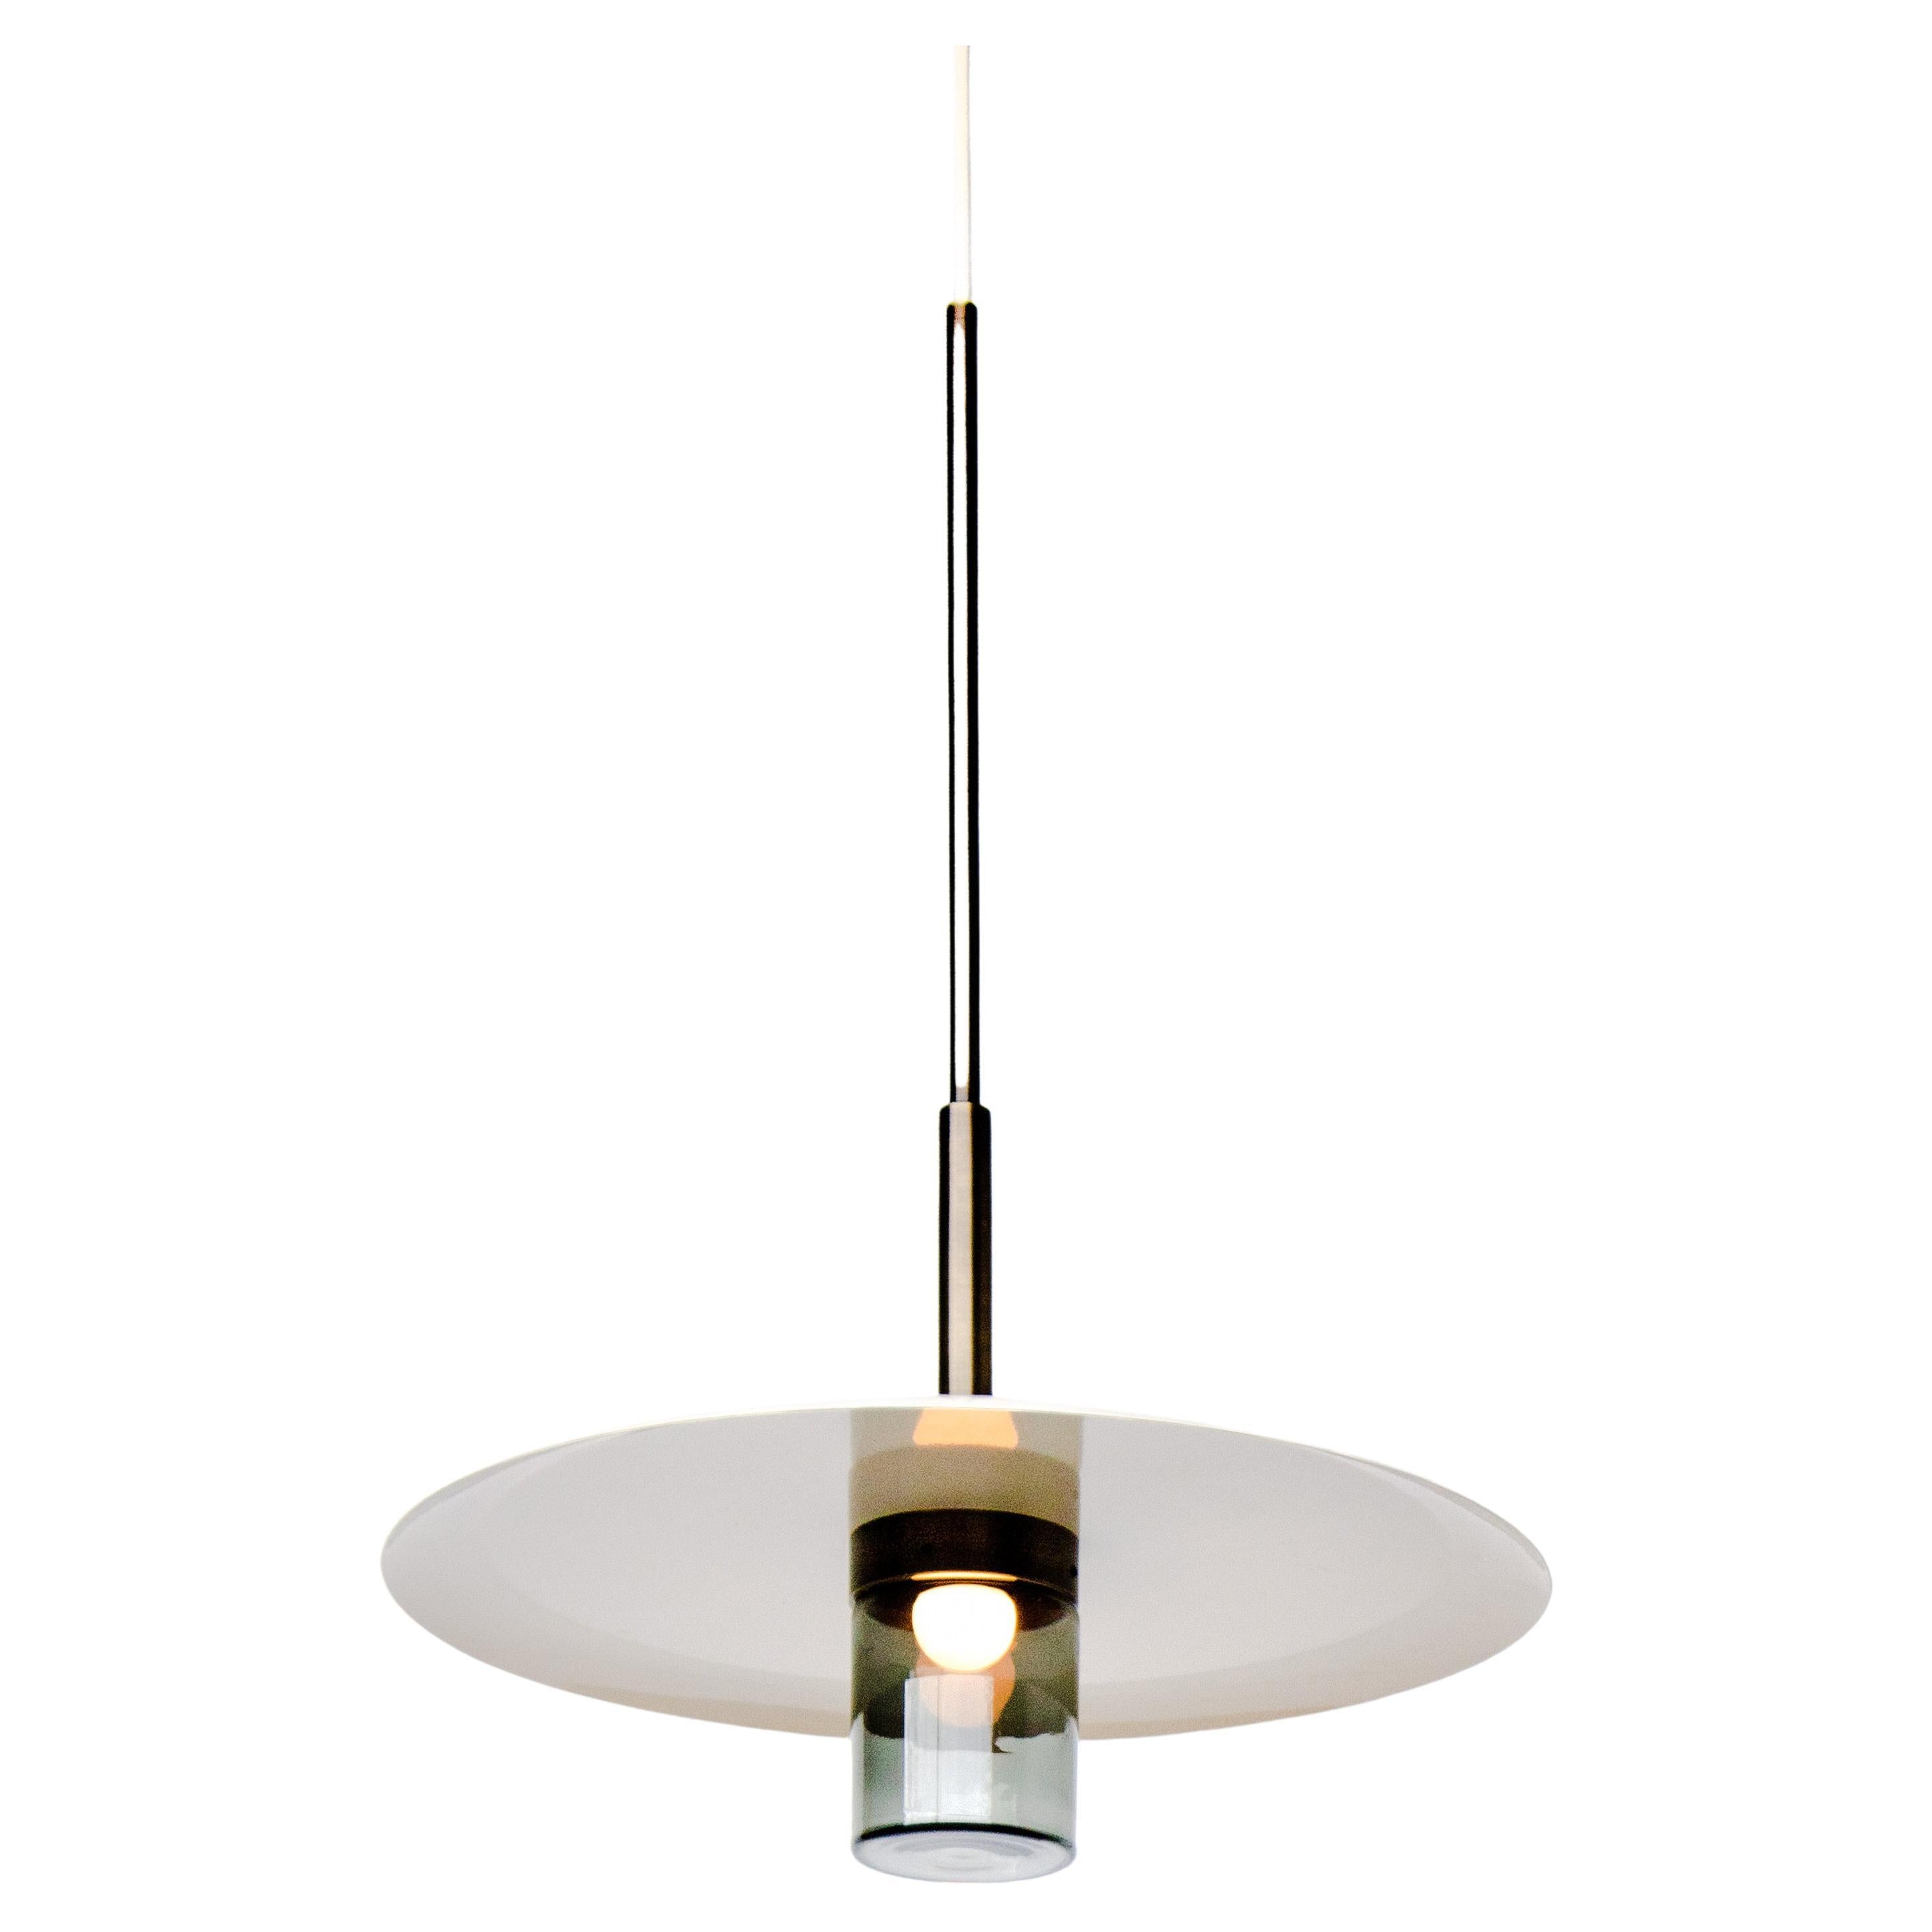 Arthur Pendant with a Powder-Coated Shade, Blonde Patina and Smoked Glass For Sale